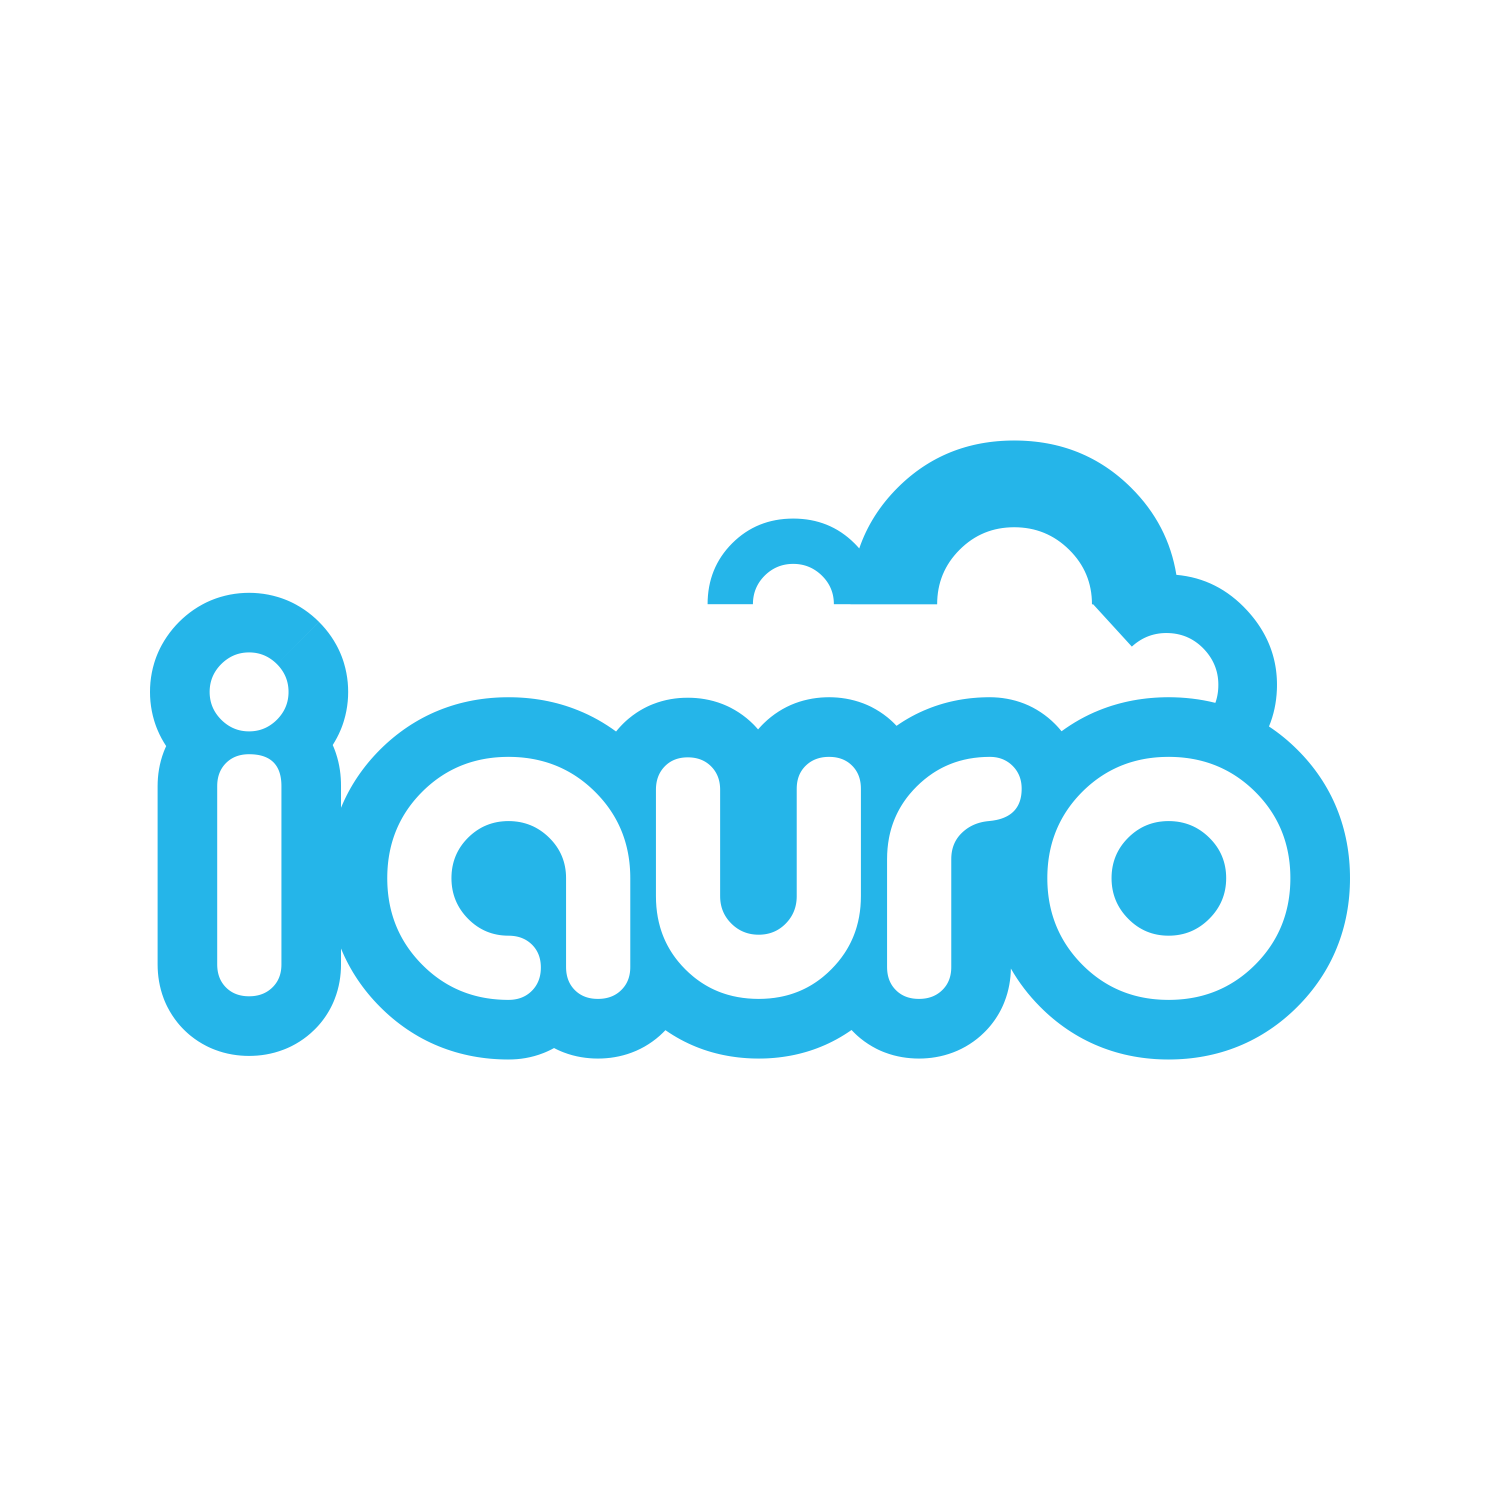 iauro systems Pvt Ltd profile on Qualified.One